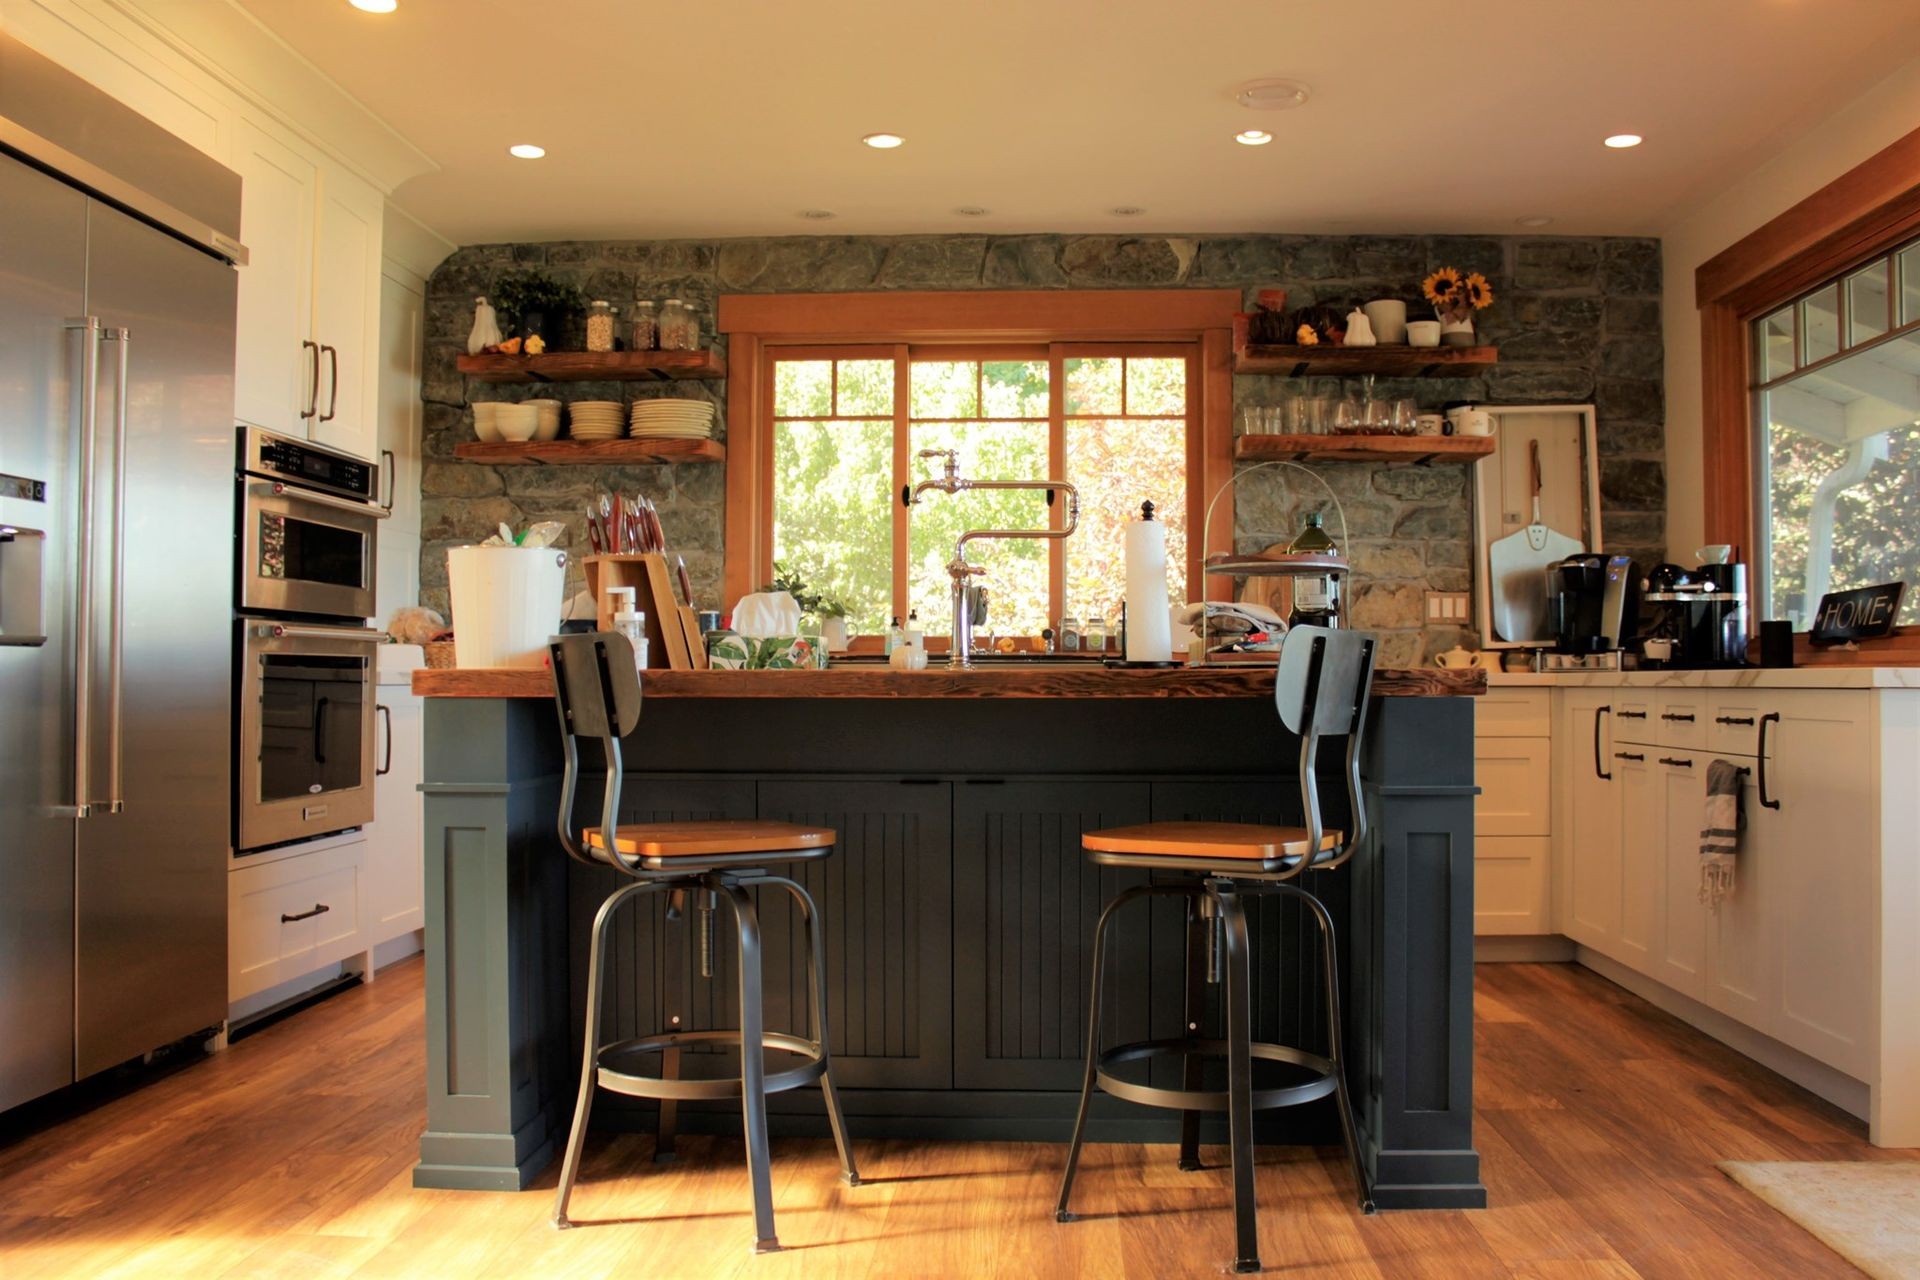 Mixed-material kitchen with wood floors and a black kitchen island.